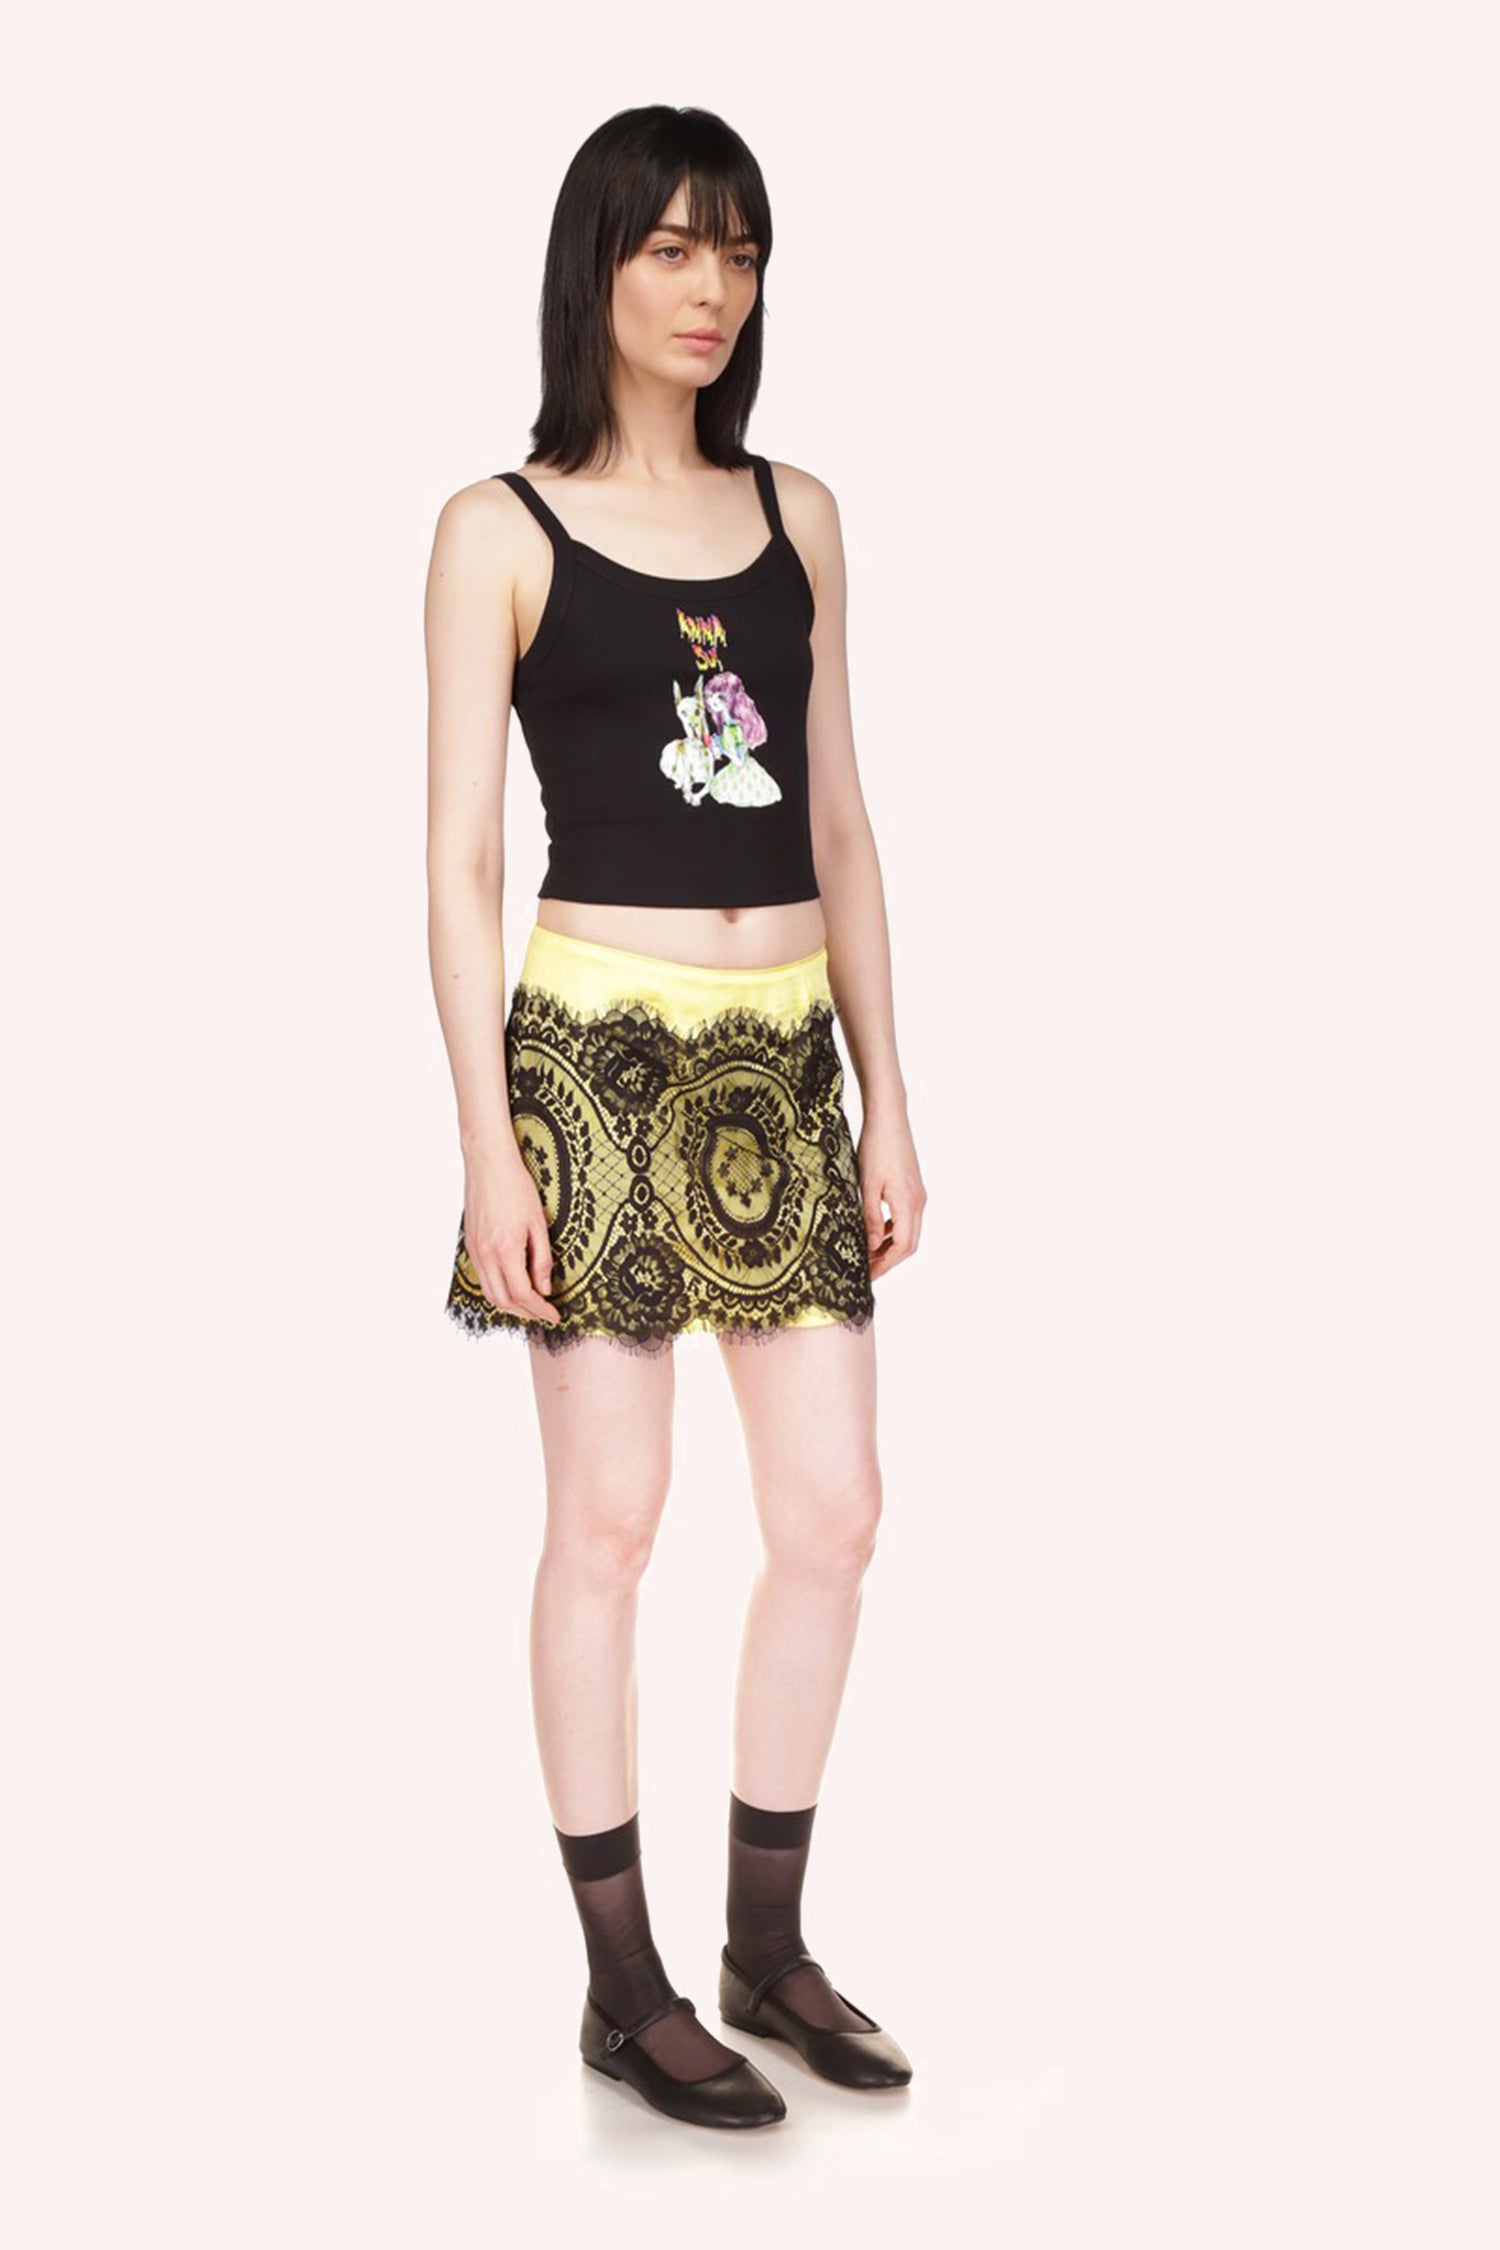 Micro Ribbed Scoop Tank Black, sleeveless, 2 black straps, Anna Sui logo above a little girl with a white dog.